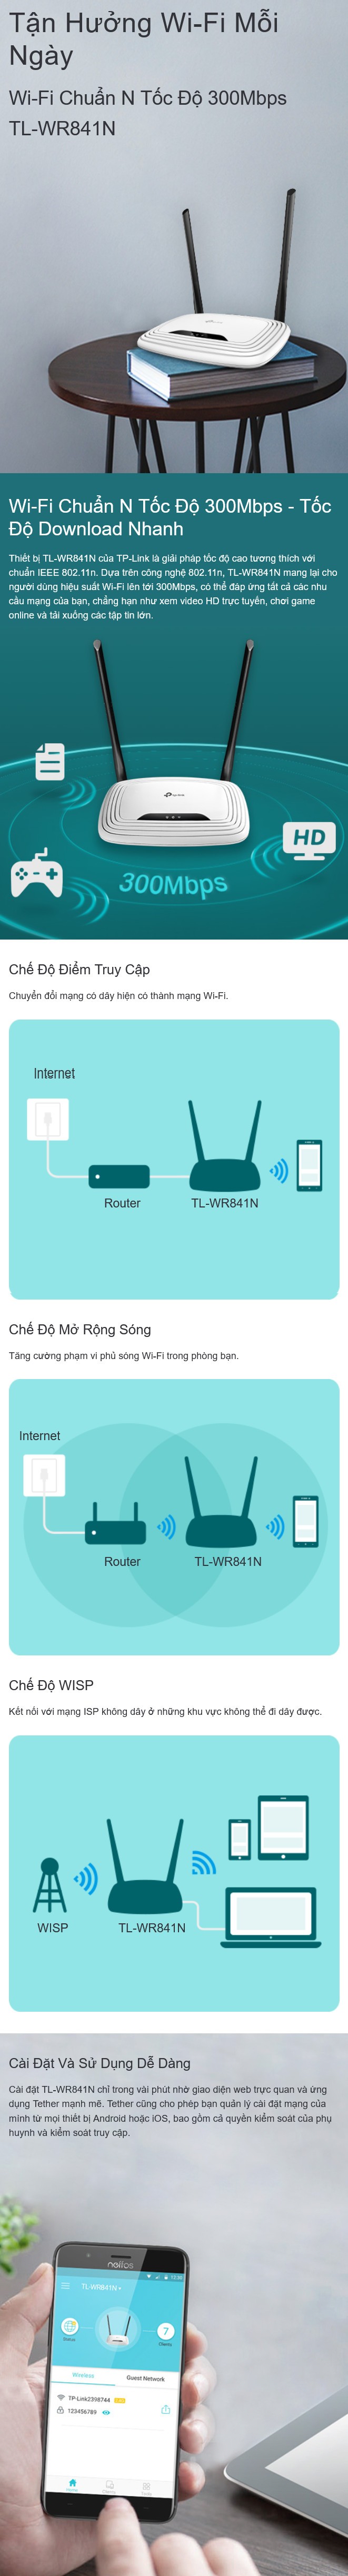 Bộ phát WIFI Router TP-Link TL WR841N